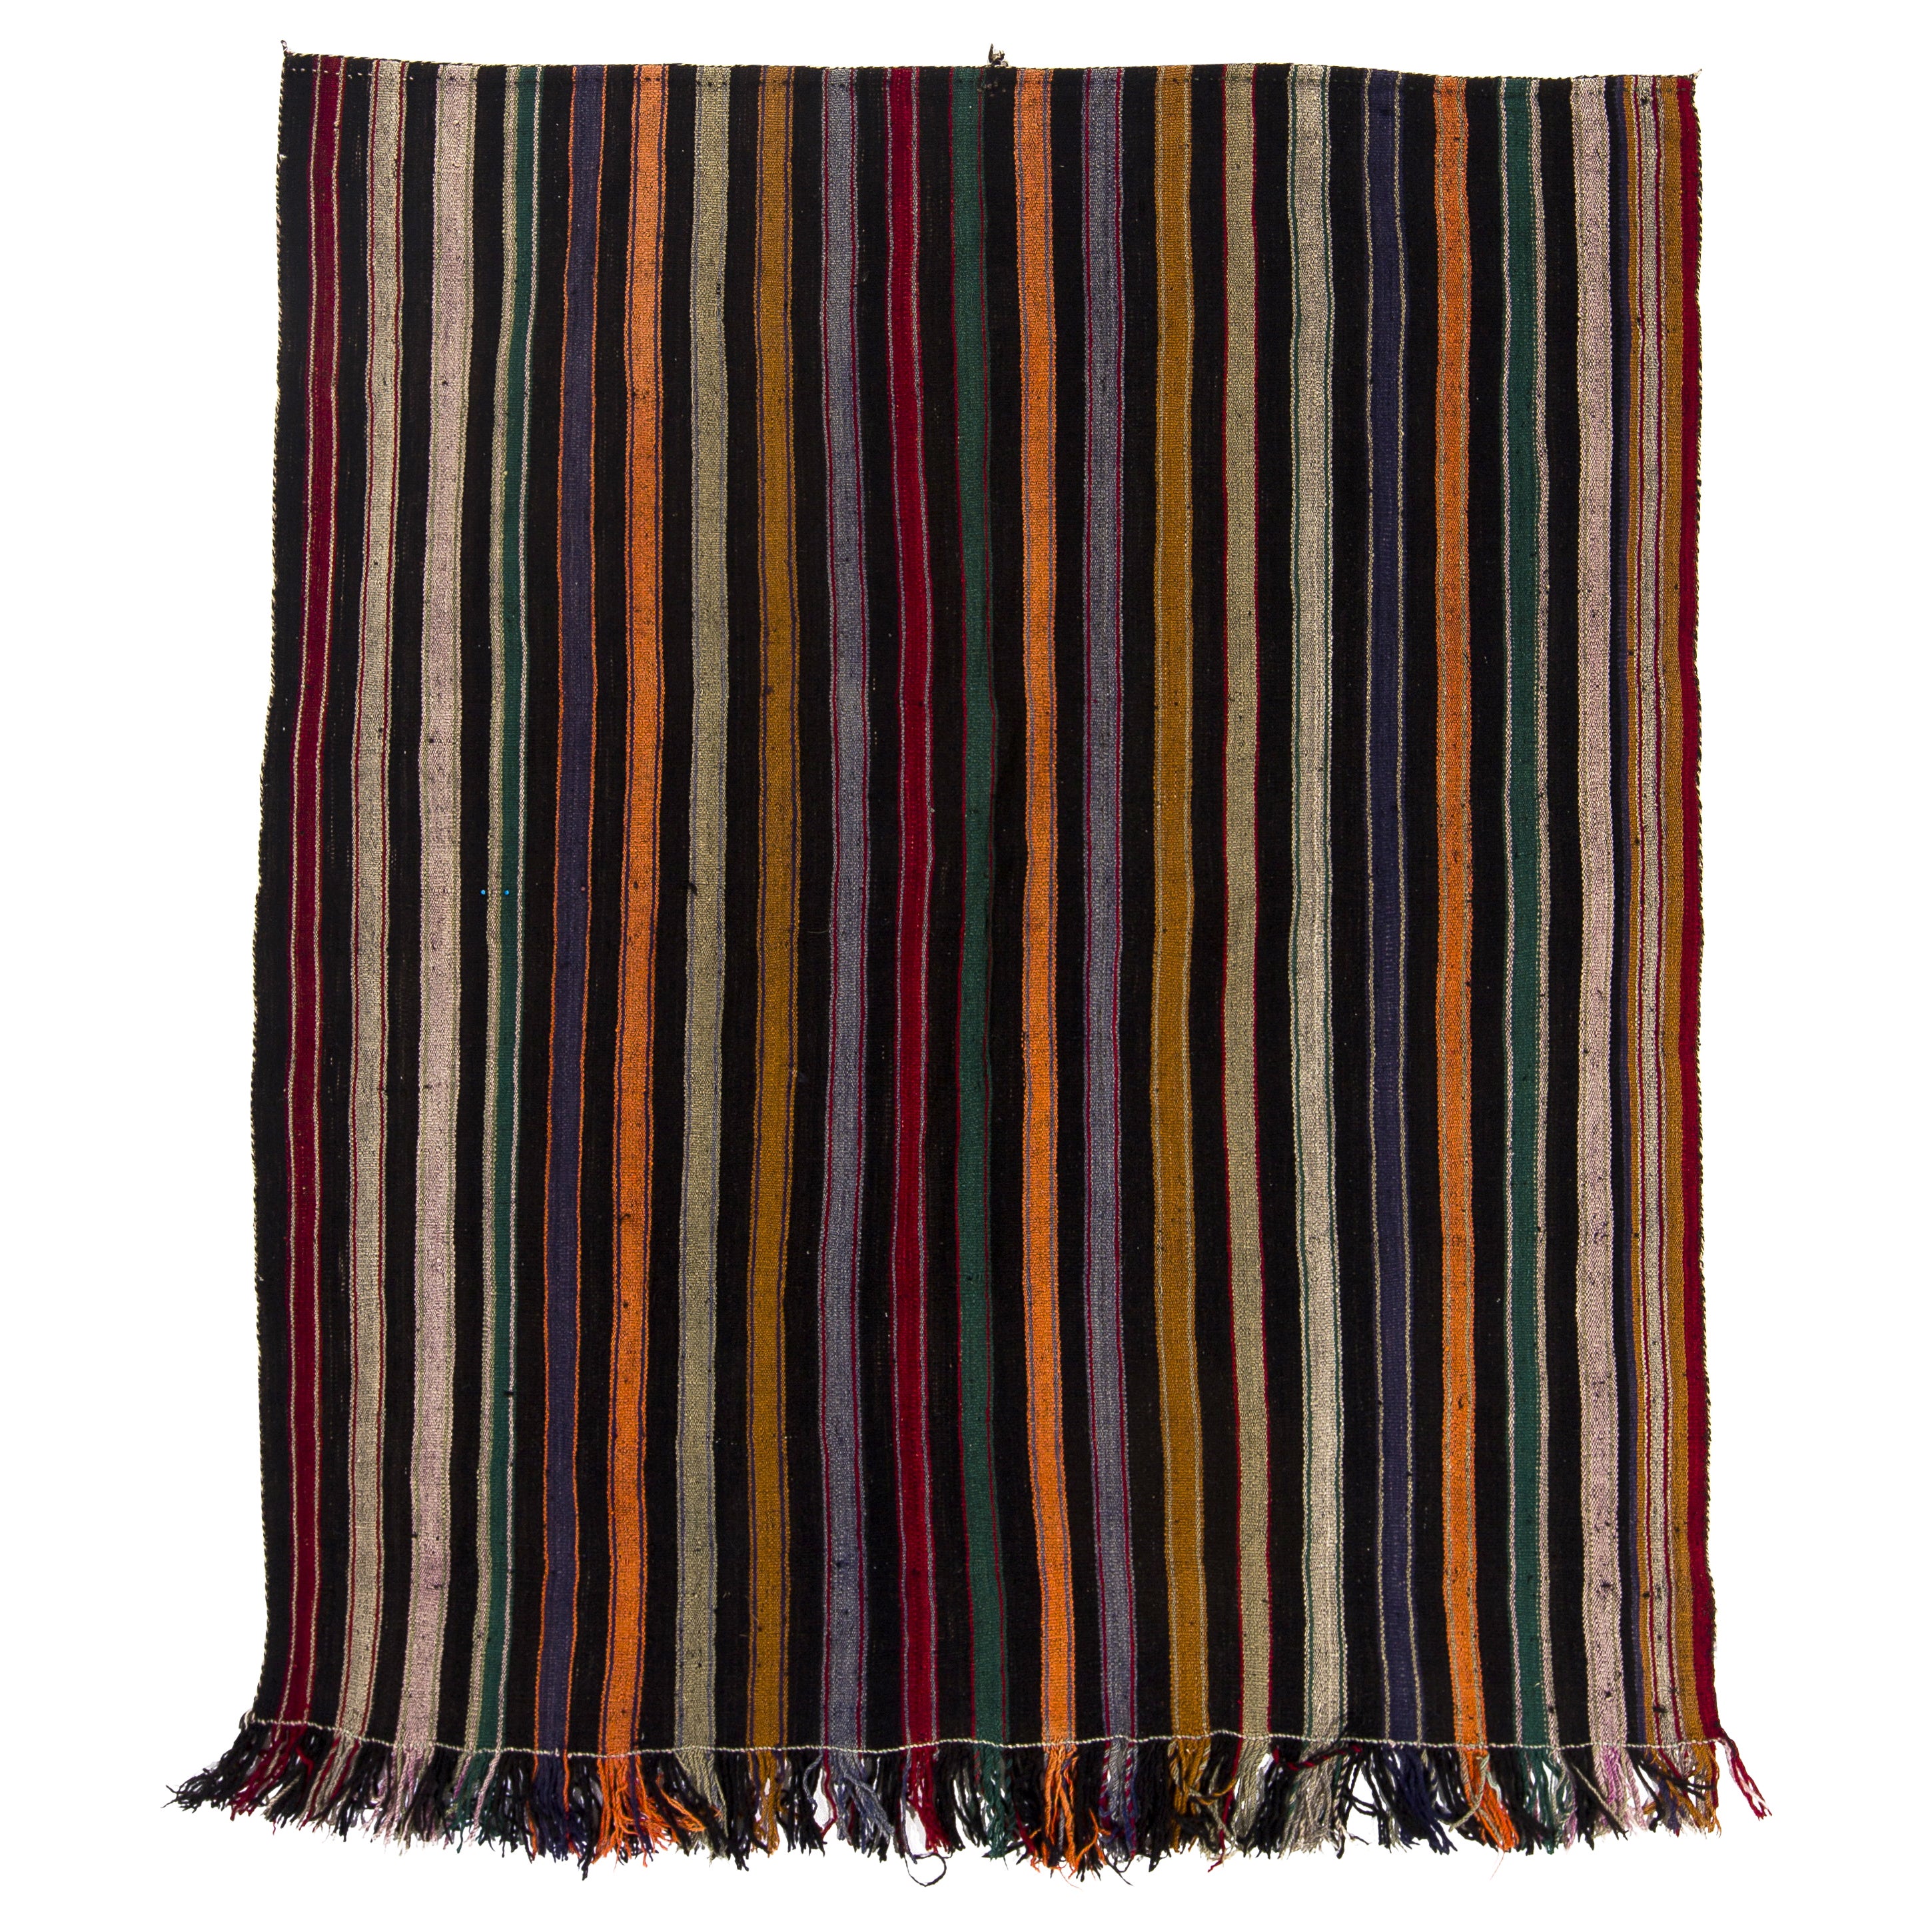 5.6x7 Ft Hand-Woven Vintage Kilim Rug with Stripes. 100% Wool Floor Covering For Sale